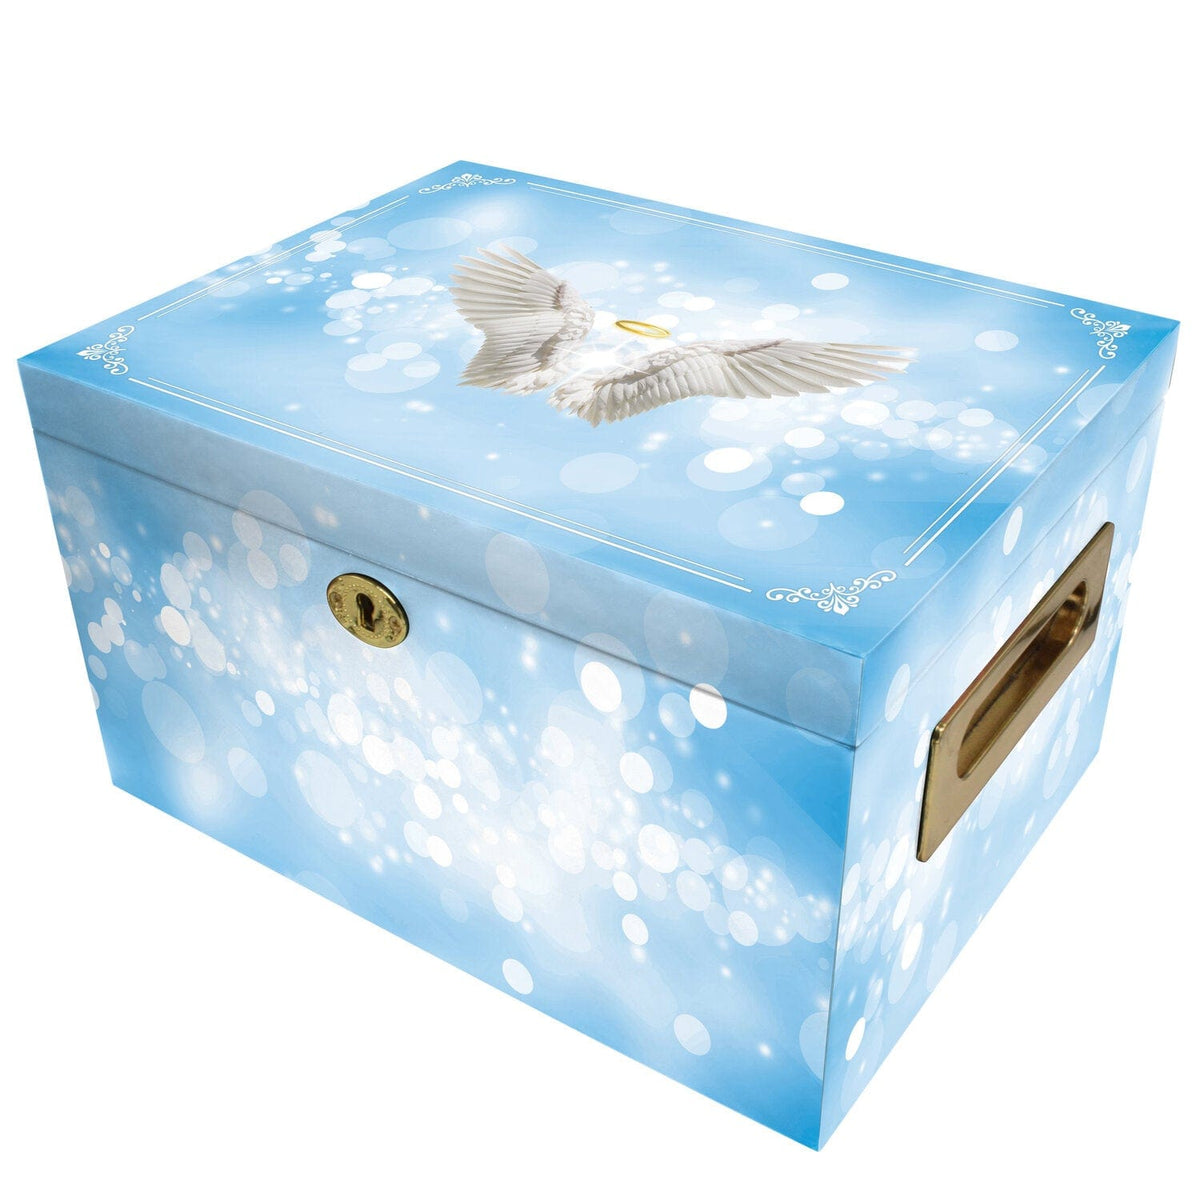 Commemorative Cremation Urns Urn Collection Chest Angel of Mine (Blue) Memorial Collection Chest Cremation Urn